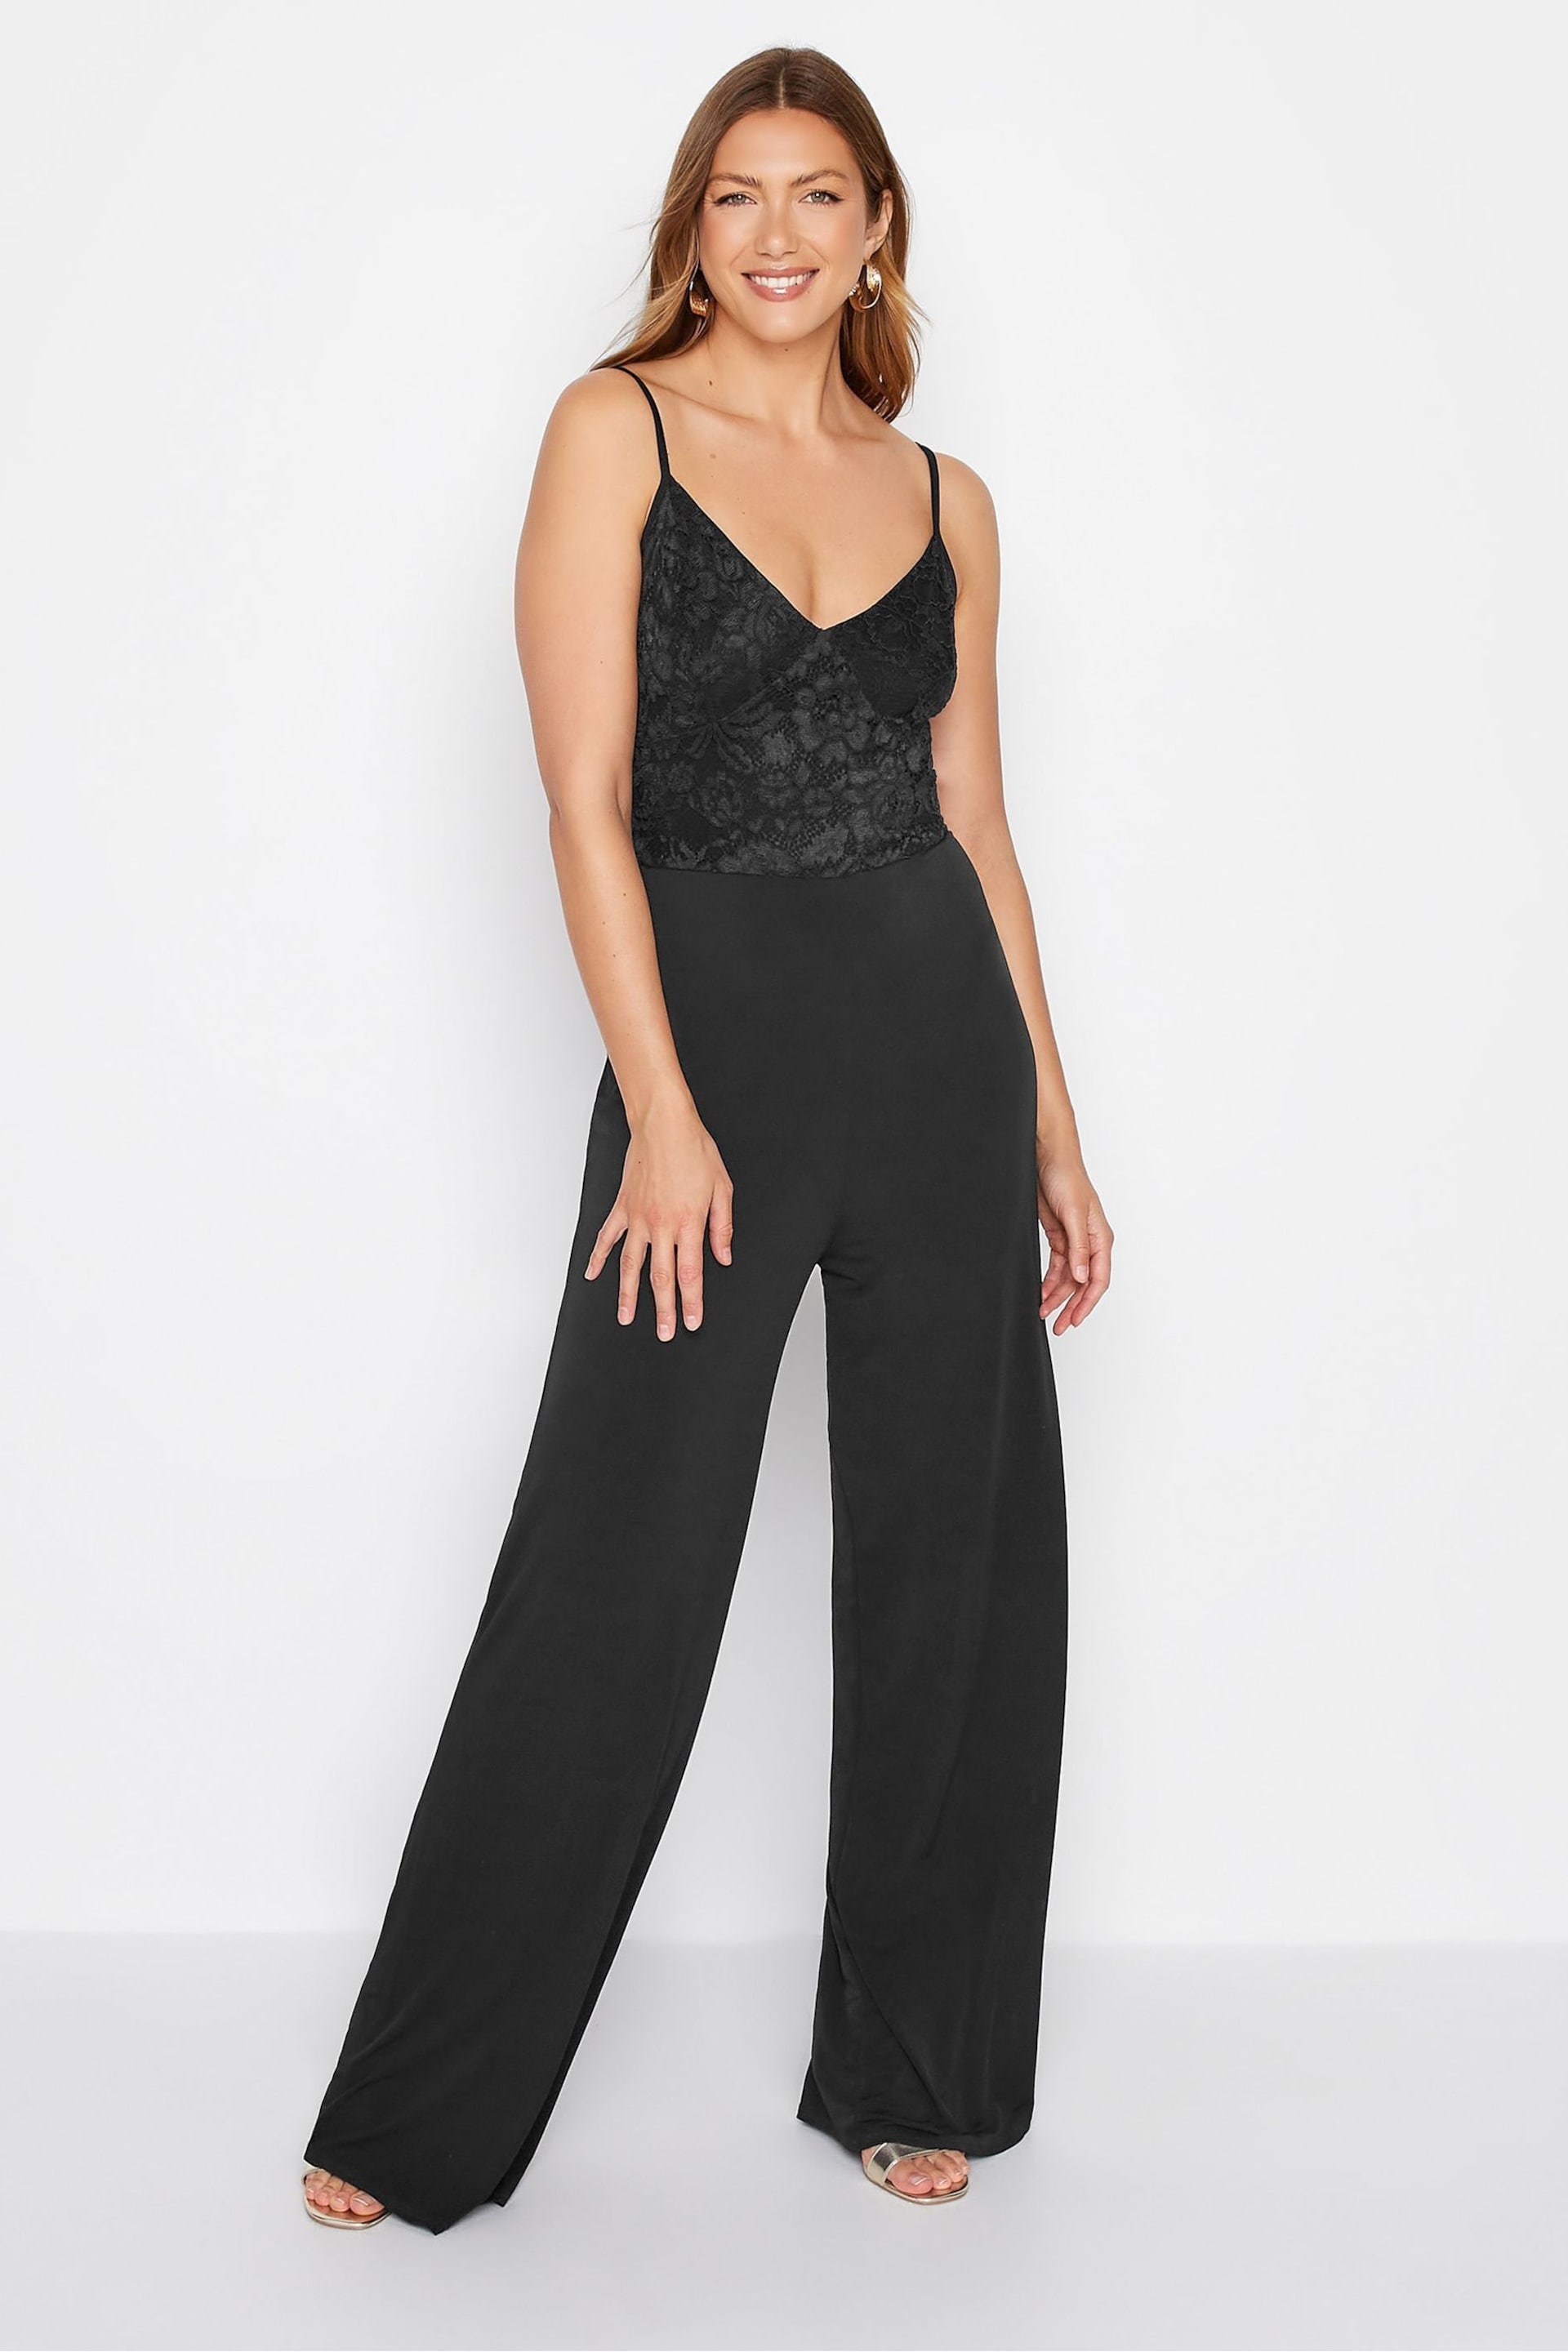 Long Tall Sally Black Lace Cami Stretch Jumpsuit - Image 4 of 4